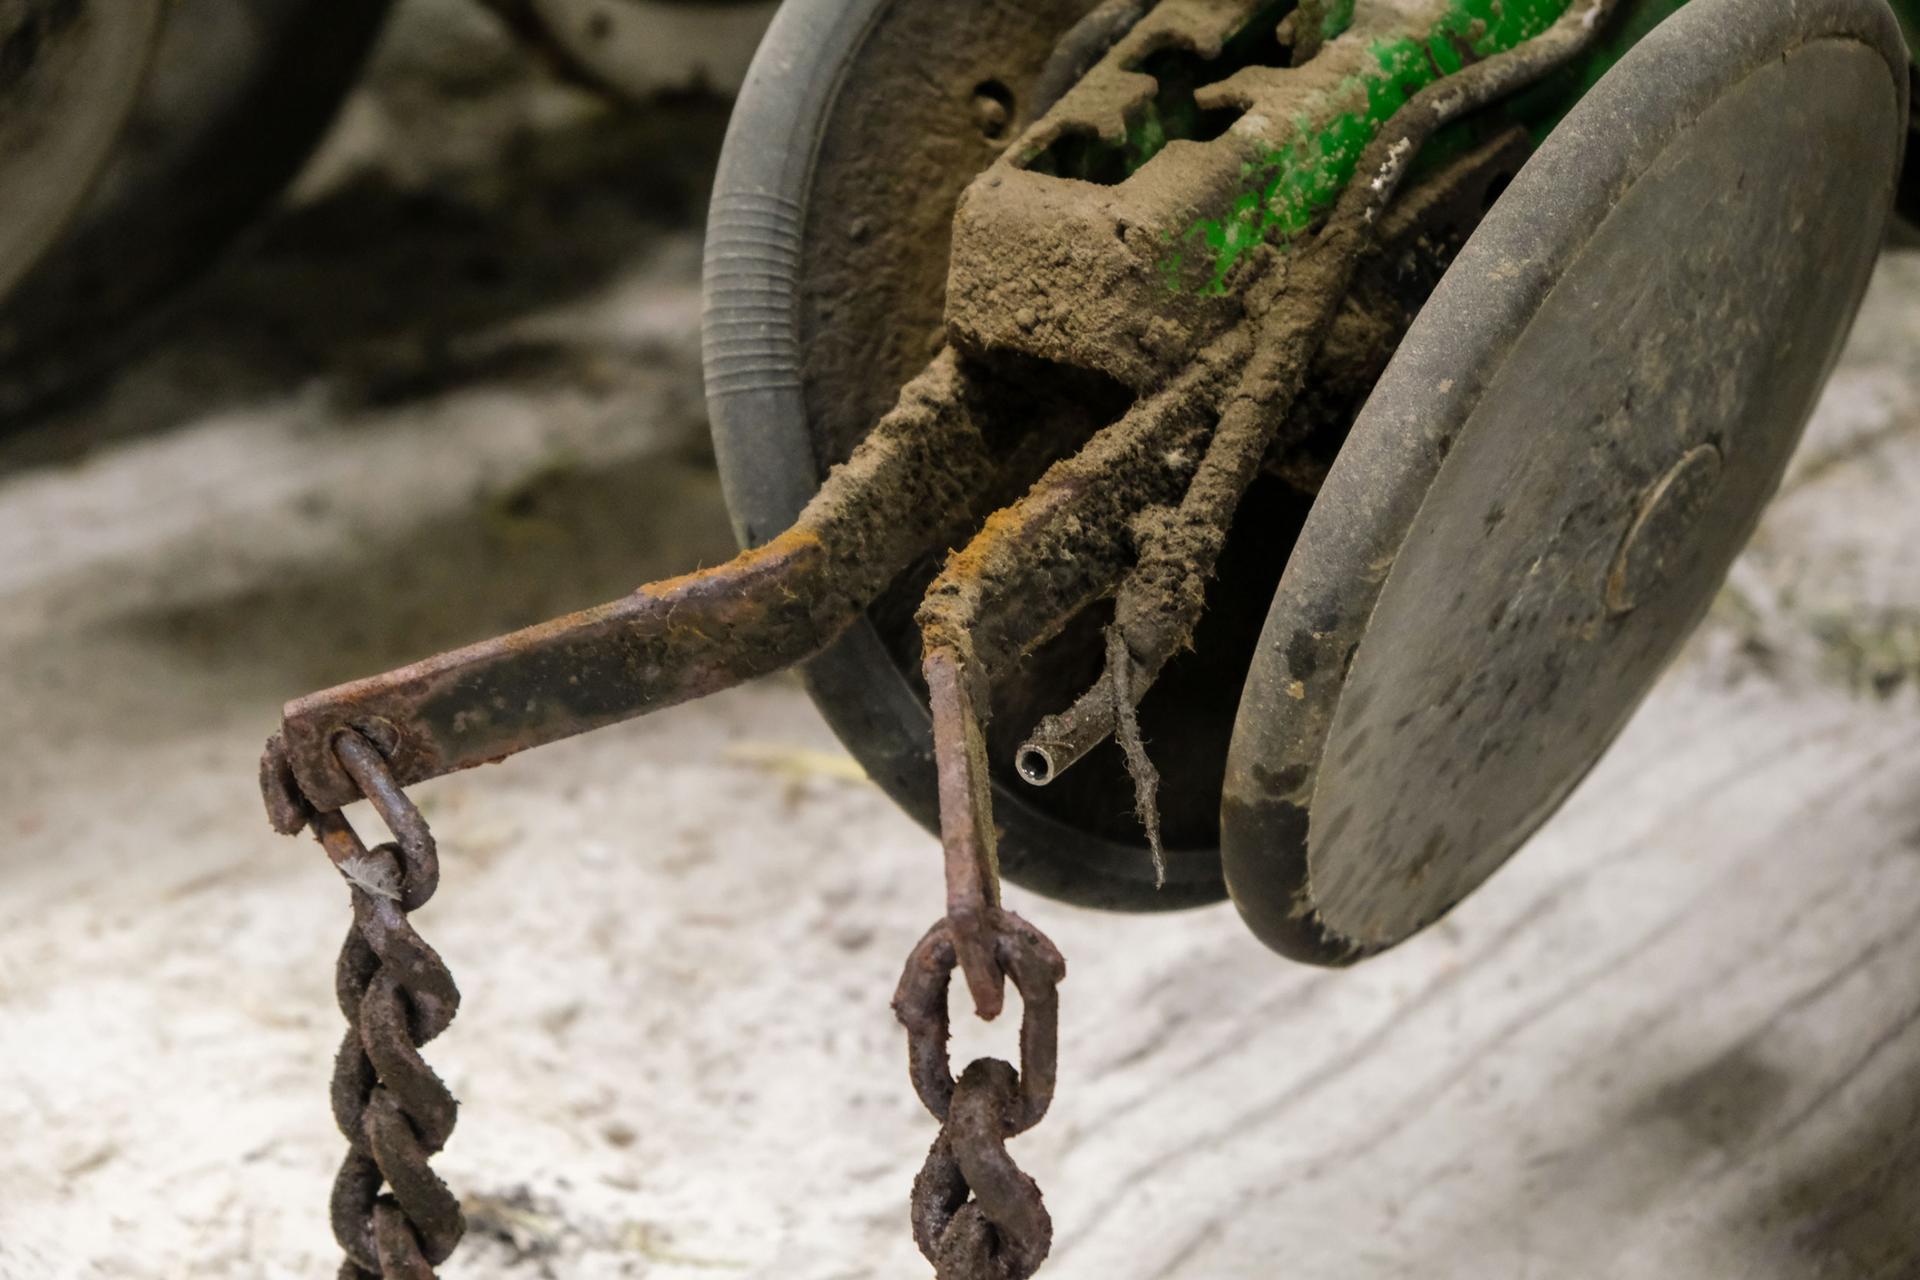 A wheel is shown with rusted metal chains attached and a small tube is connected.